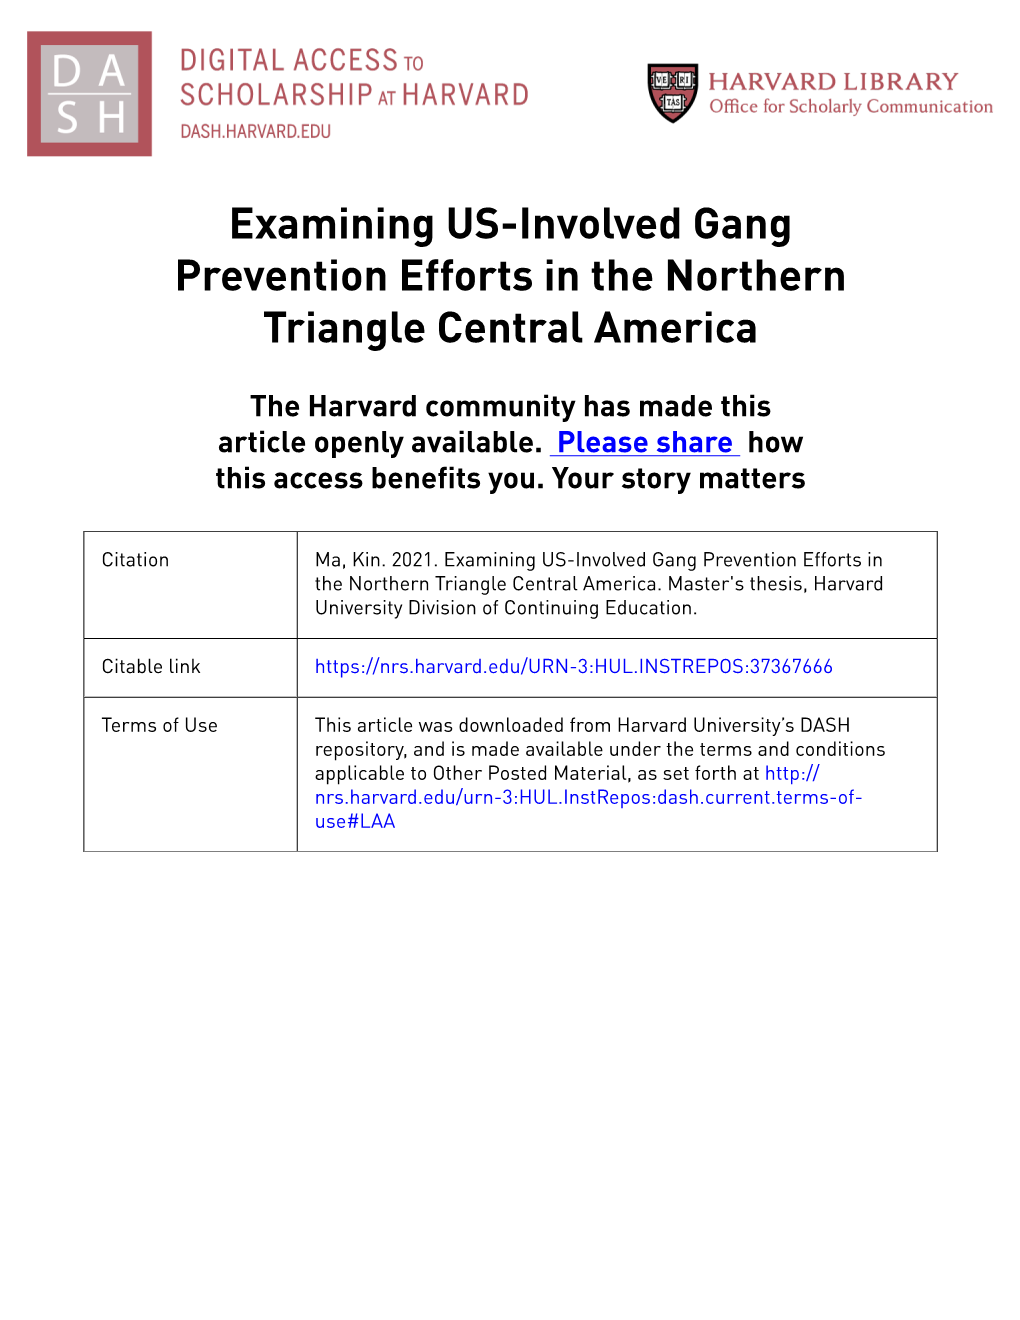 Examining US-Involved Gang Prevention Efforts in the Northern Triangle Central America